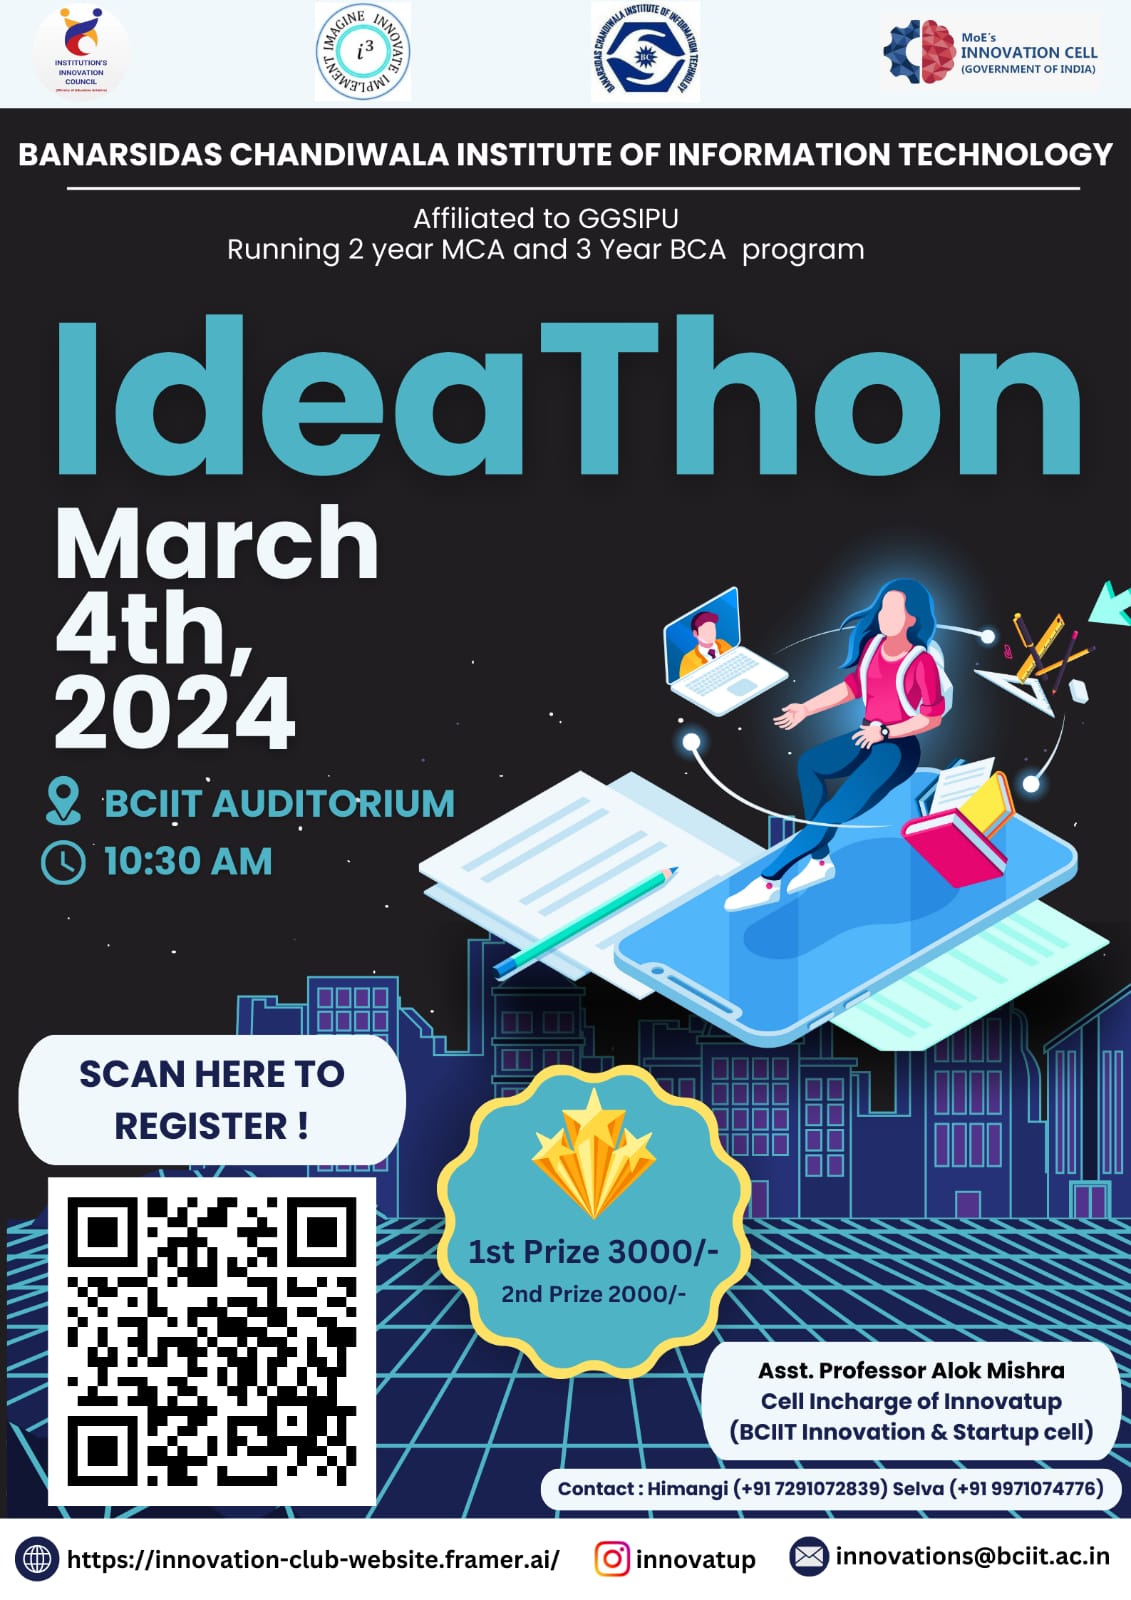 IdeaThon March 4th 2024 - Innovative Cell Initiative